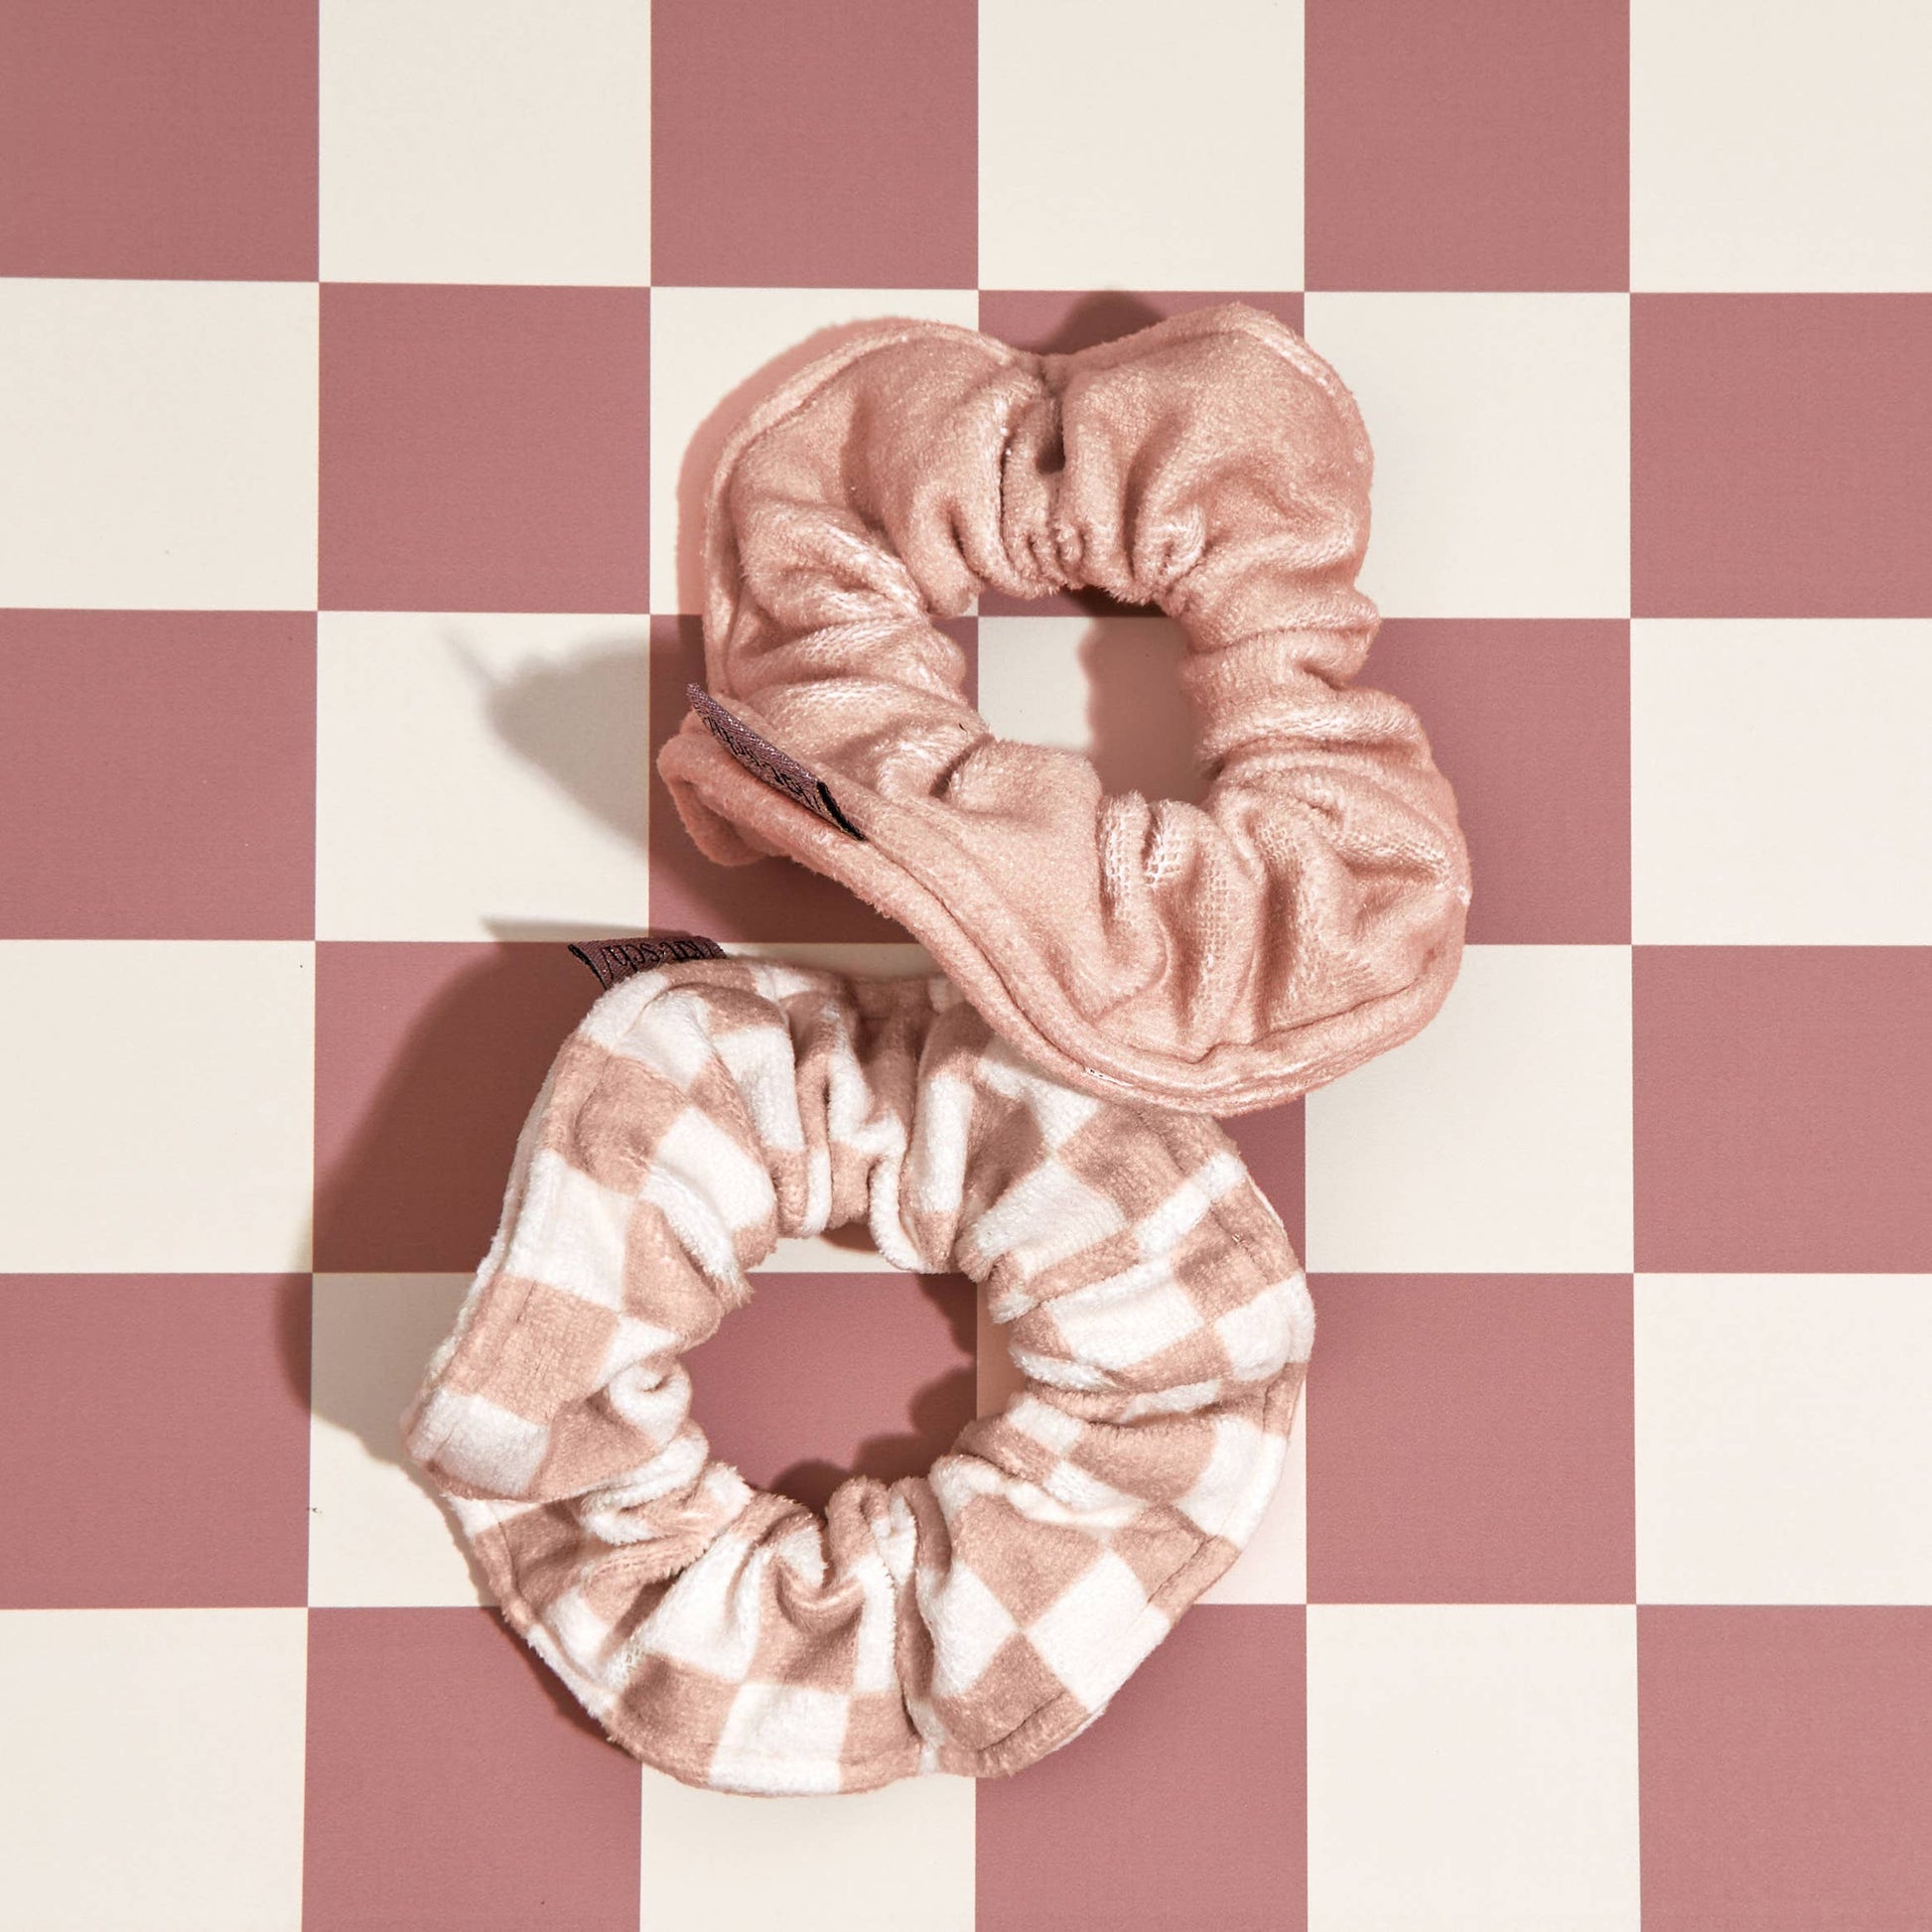 Microfiber Quick-Dry Towel Scrunchie 2PC- Terracotta Checker-KITSCH--The Twisted Chandelier